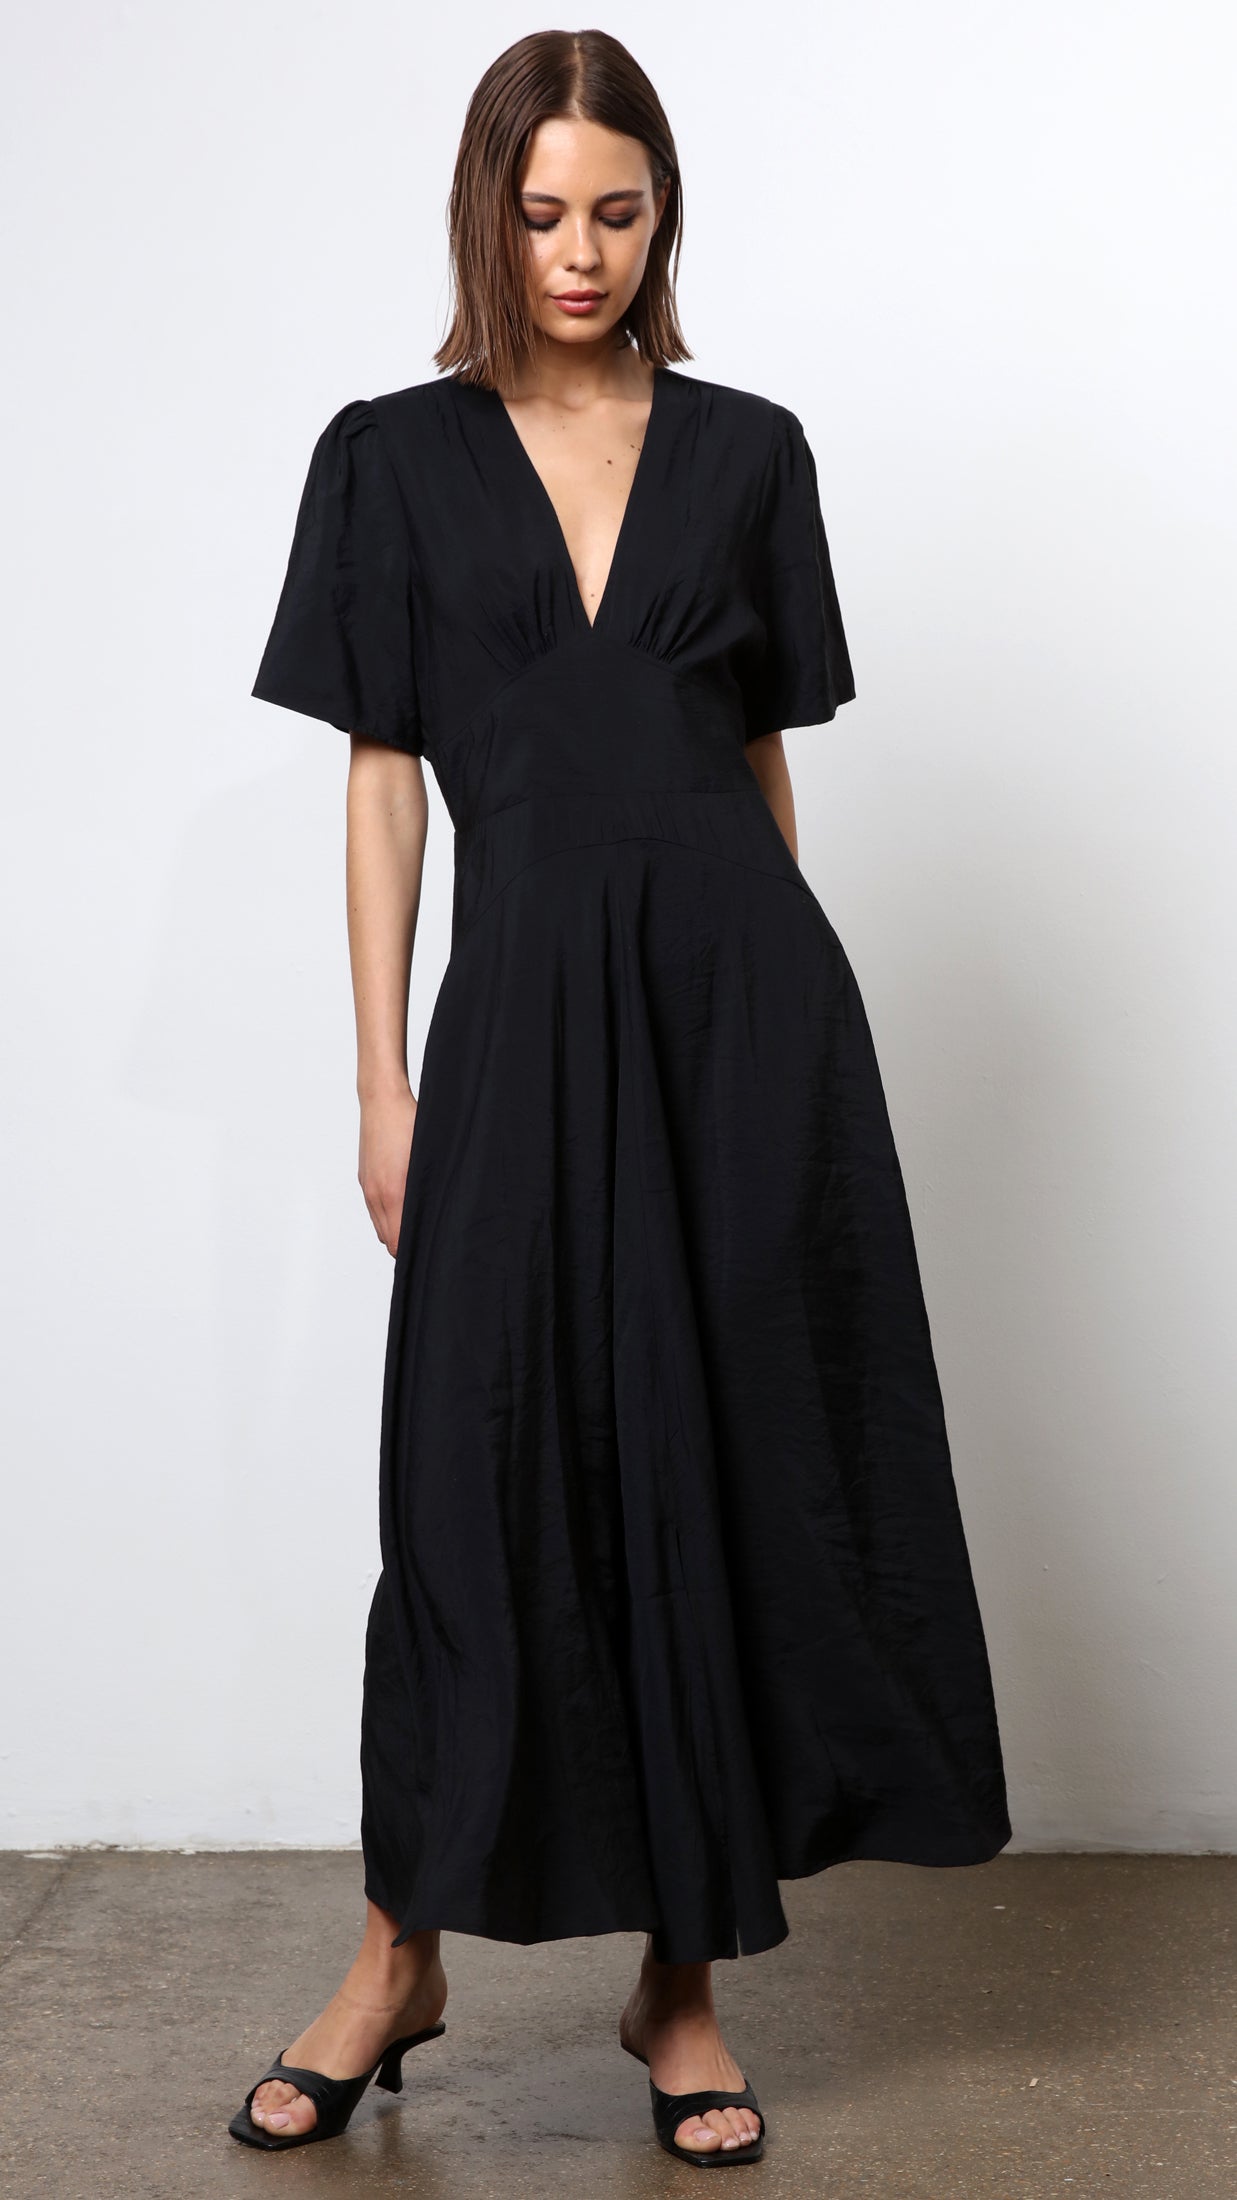 Natural Dress (Black) by Religion